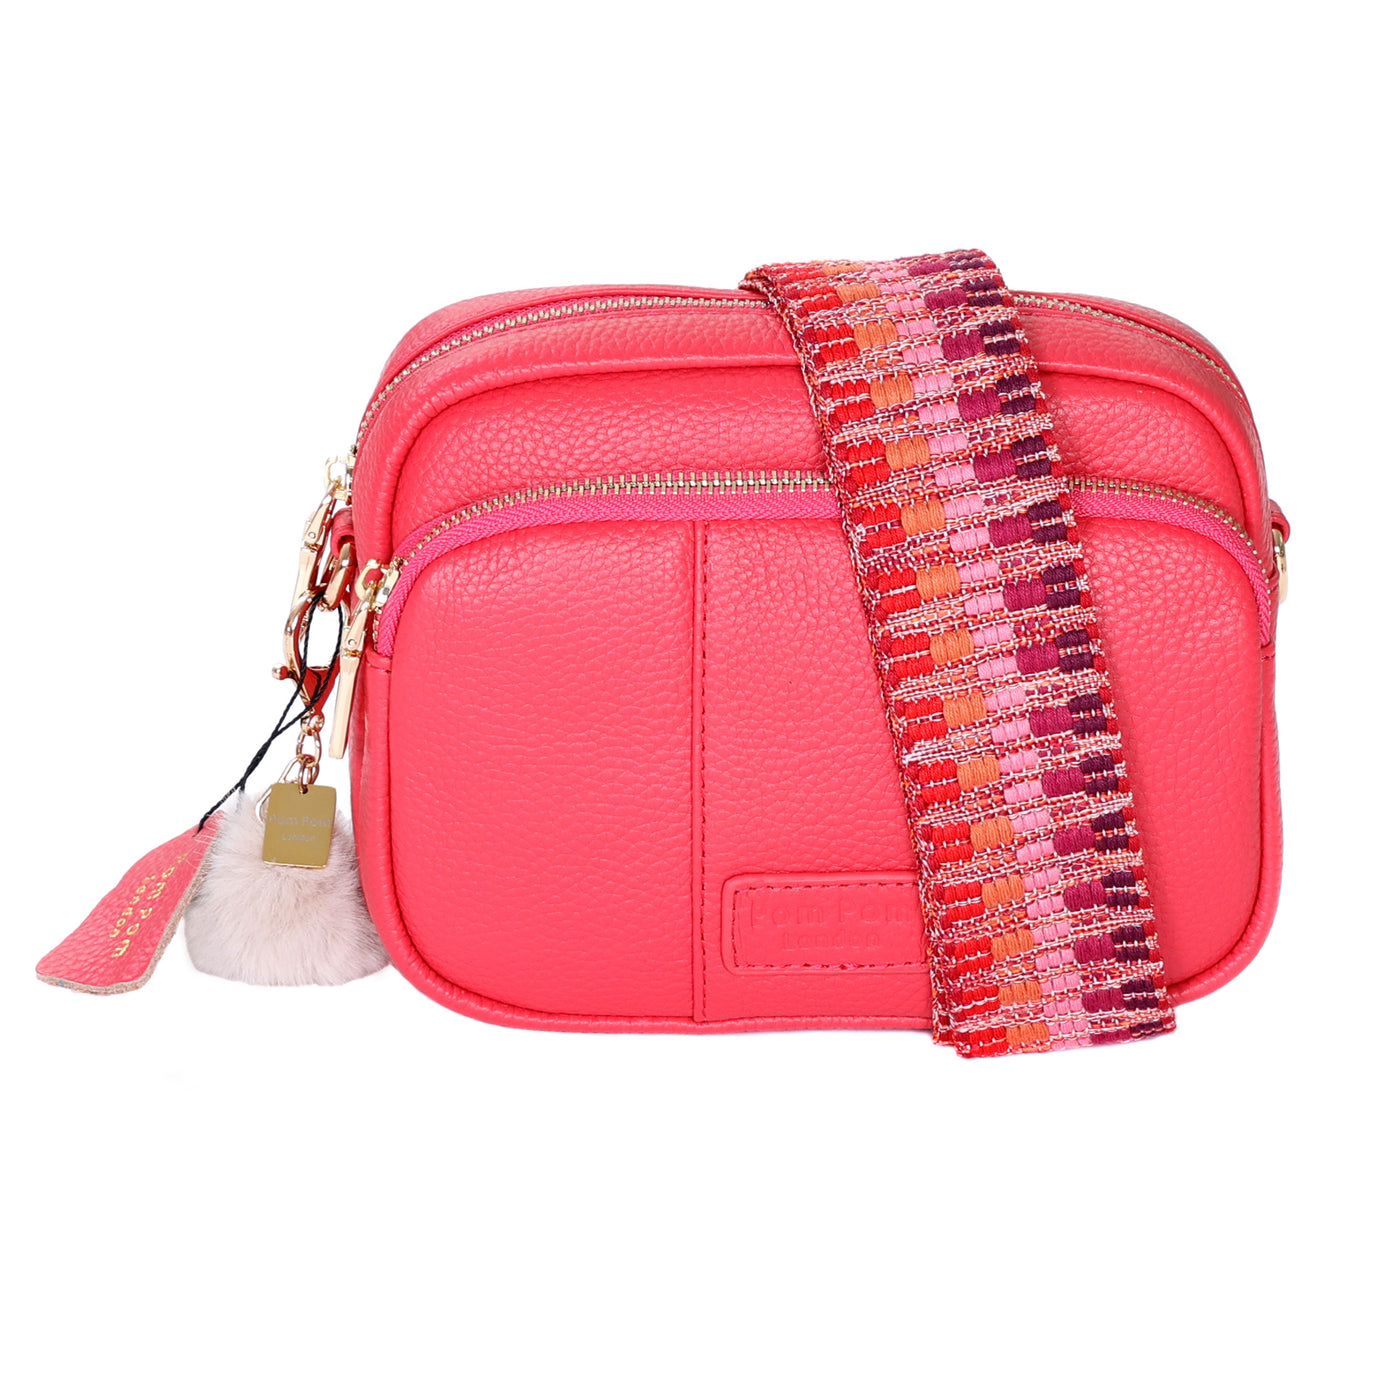 Mayfair Bag Punch Pink & Accessories